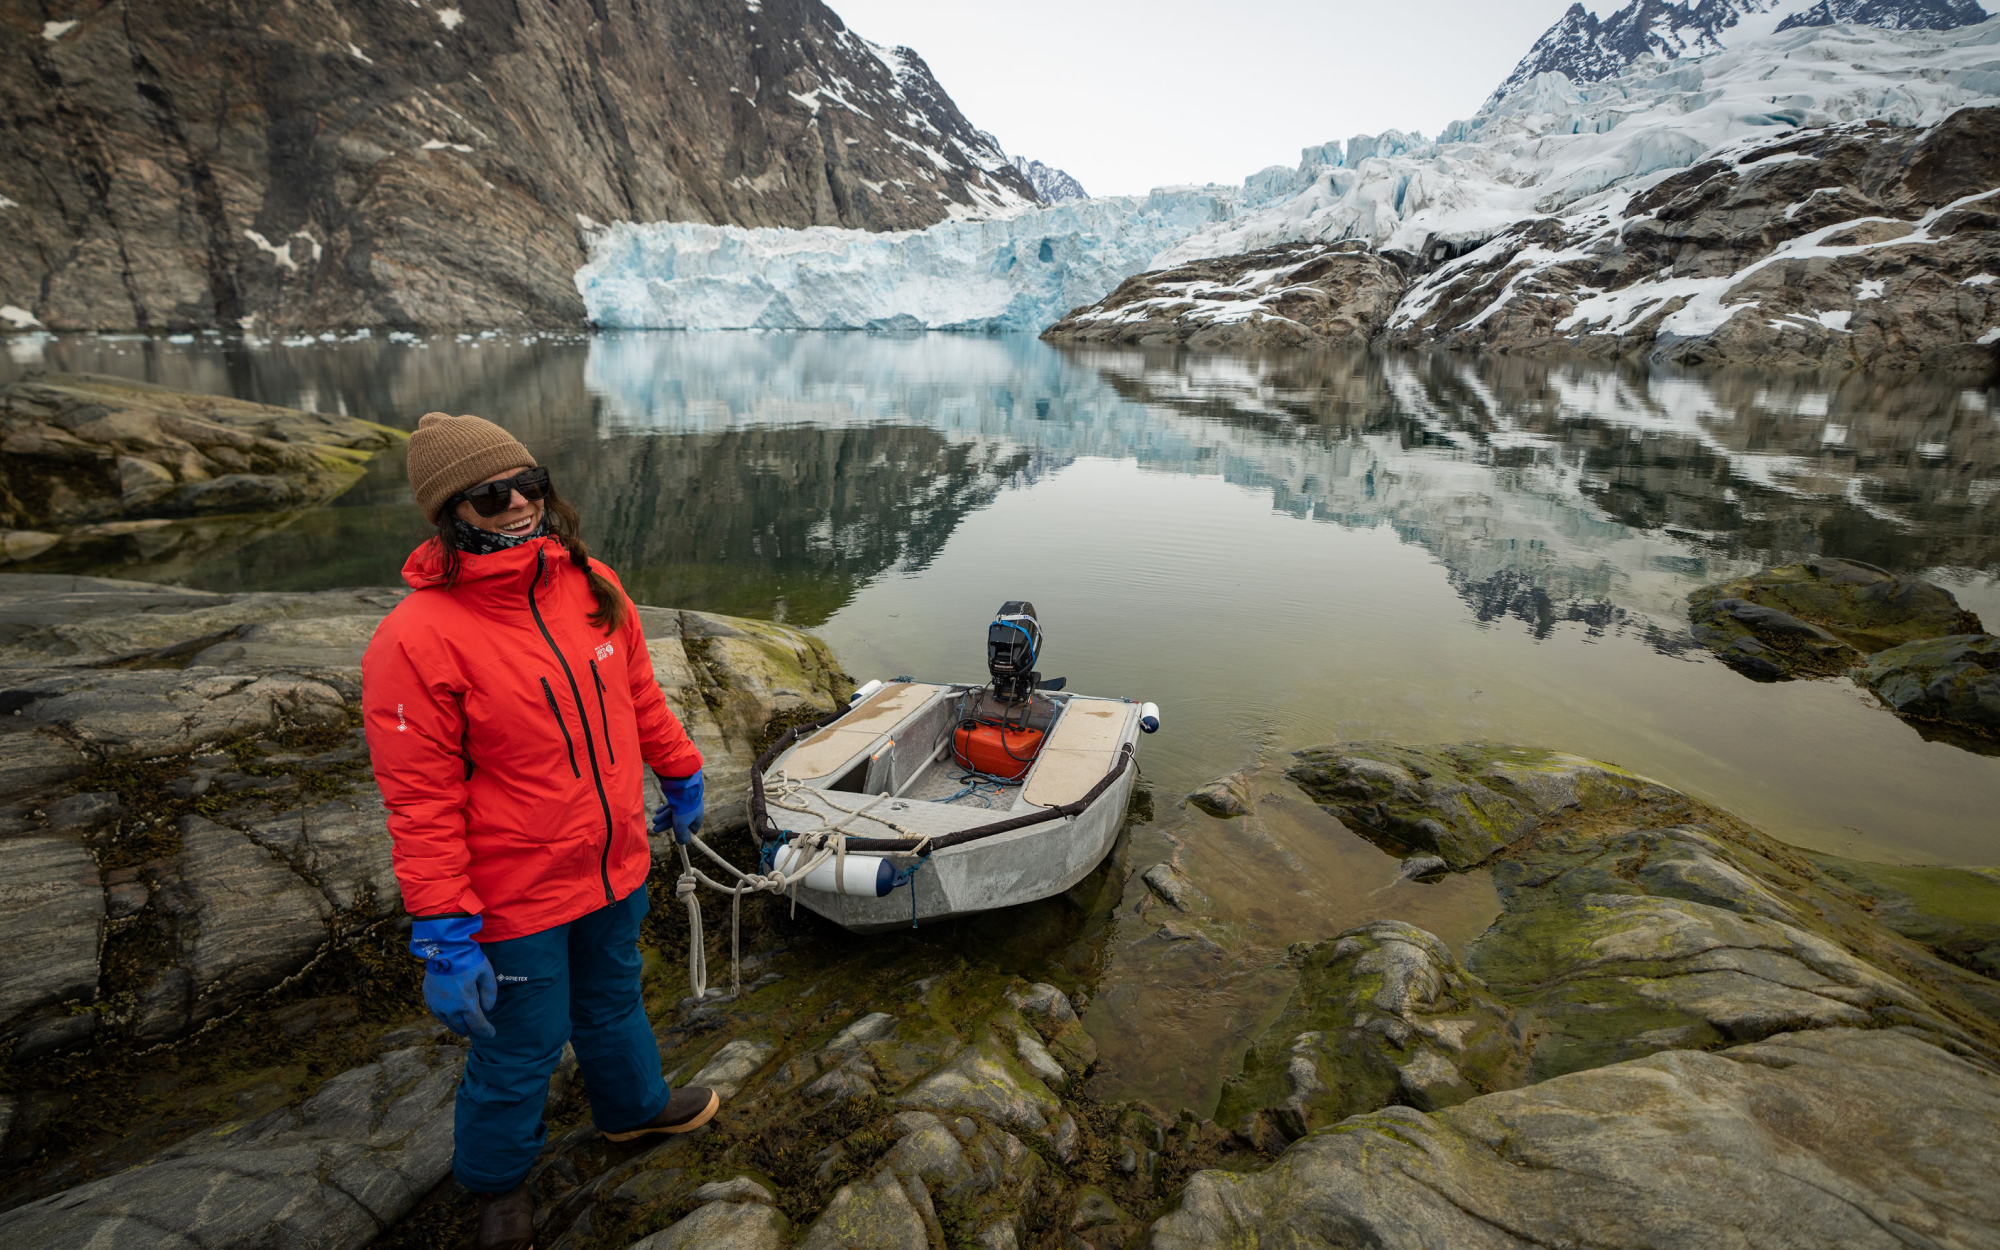 Rachael in front of the dingy in Greenland.